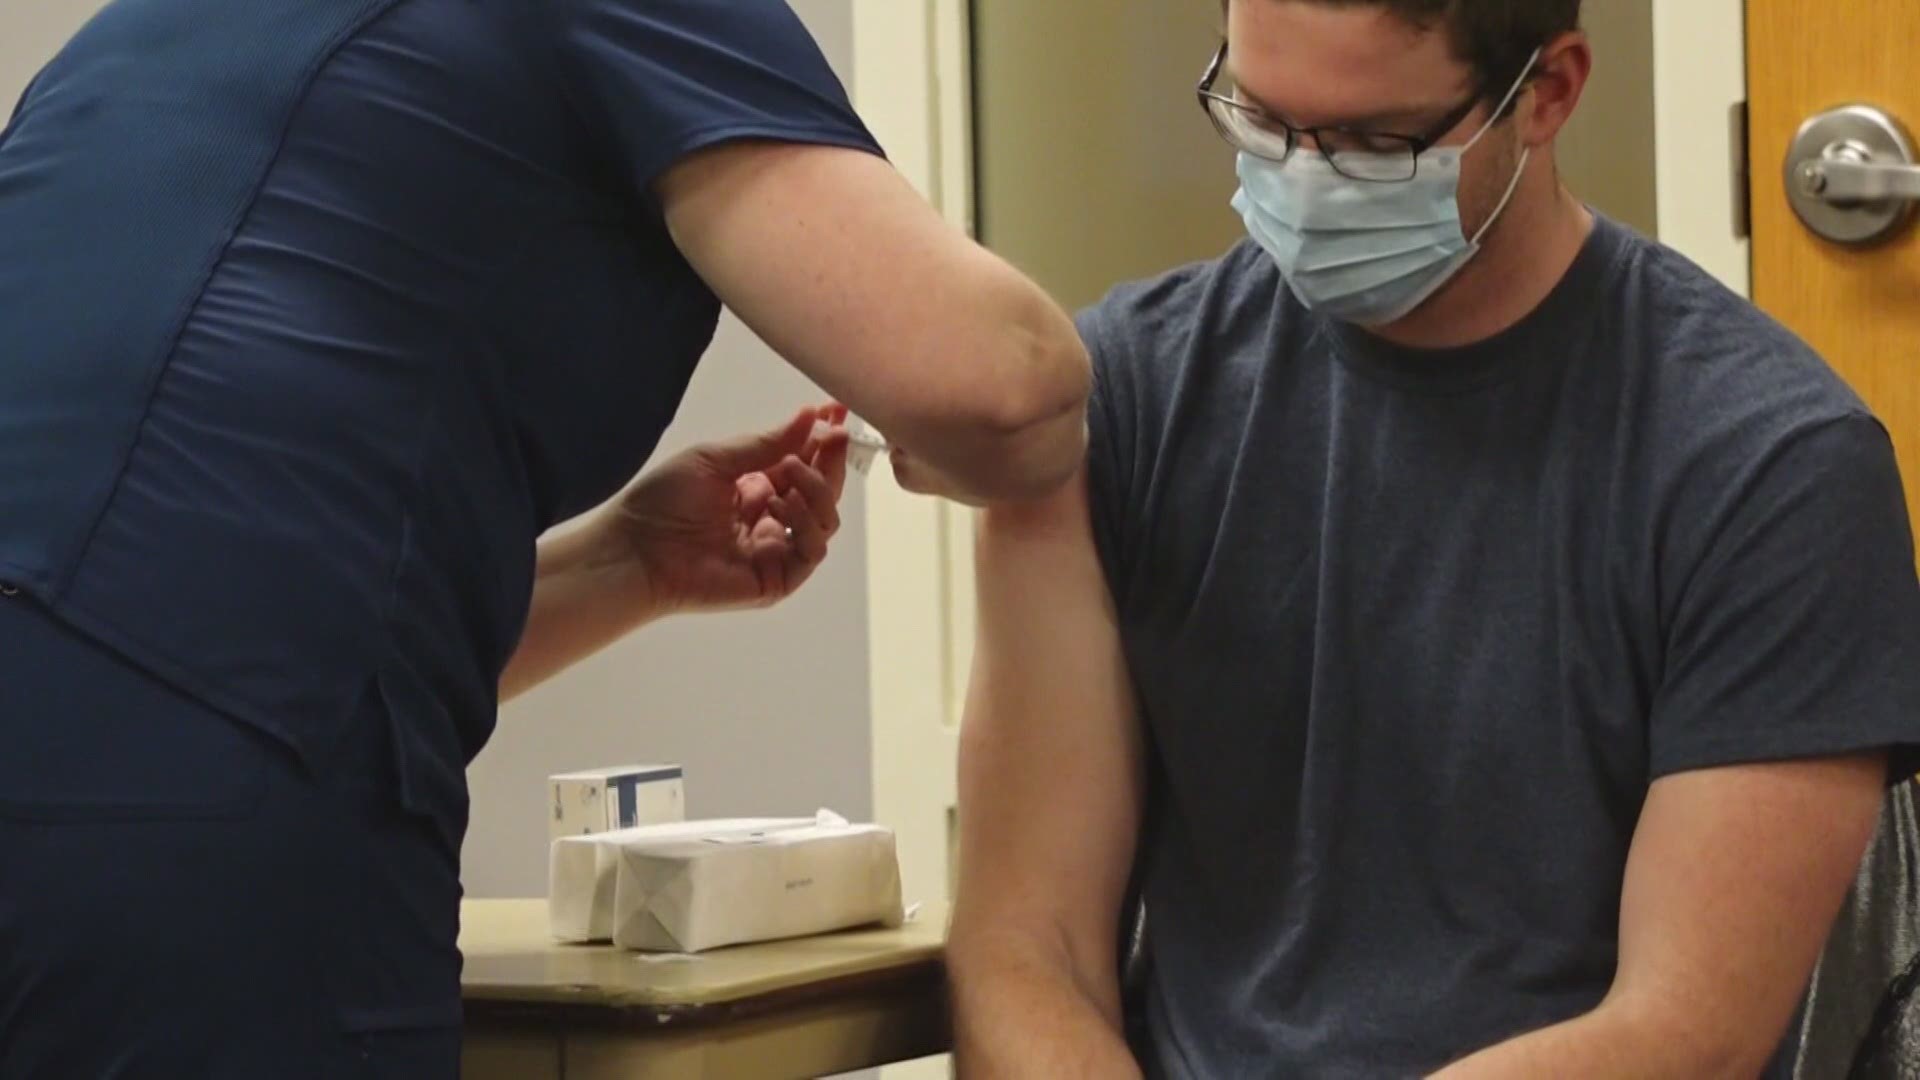 Dr. Liam Sullivan an infectious disease specialist with Spectrum Health explains why you can still carry the virus even after being vaccinated.